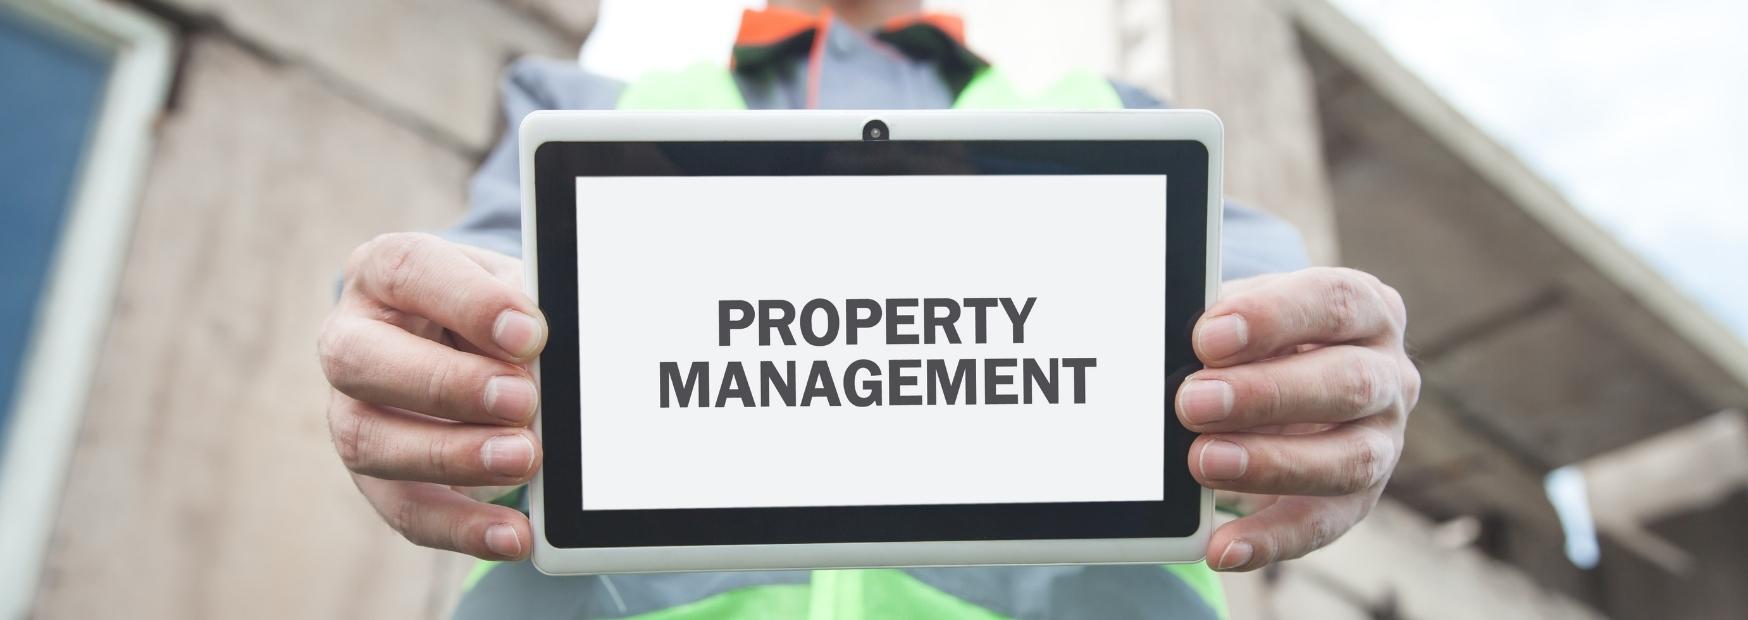 Online Associates in Property Management - featured image